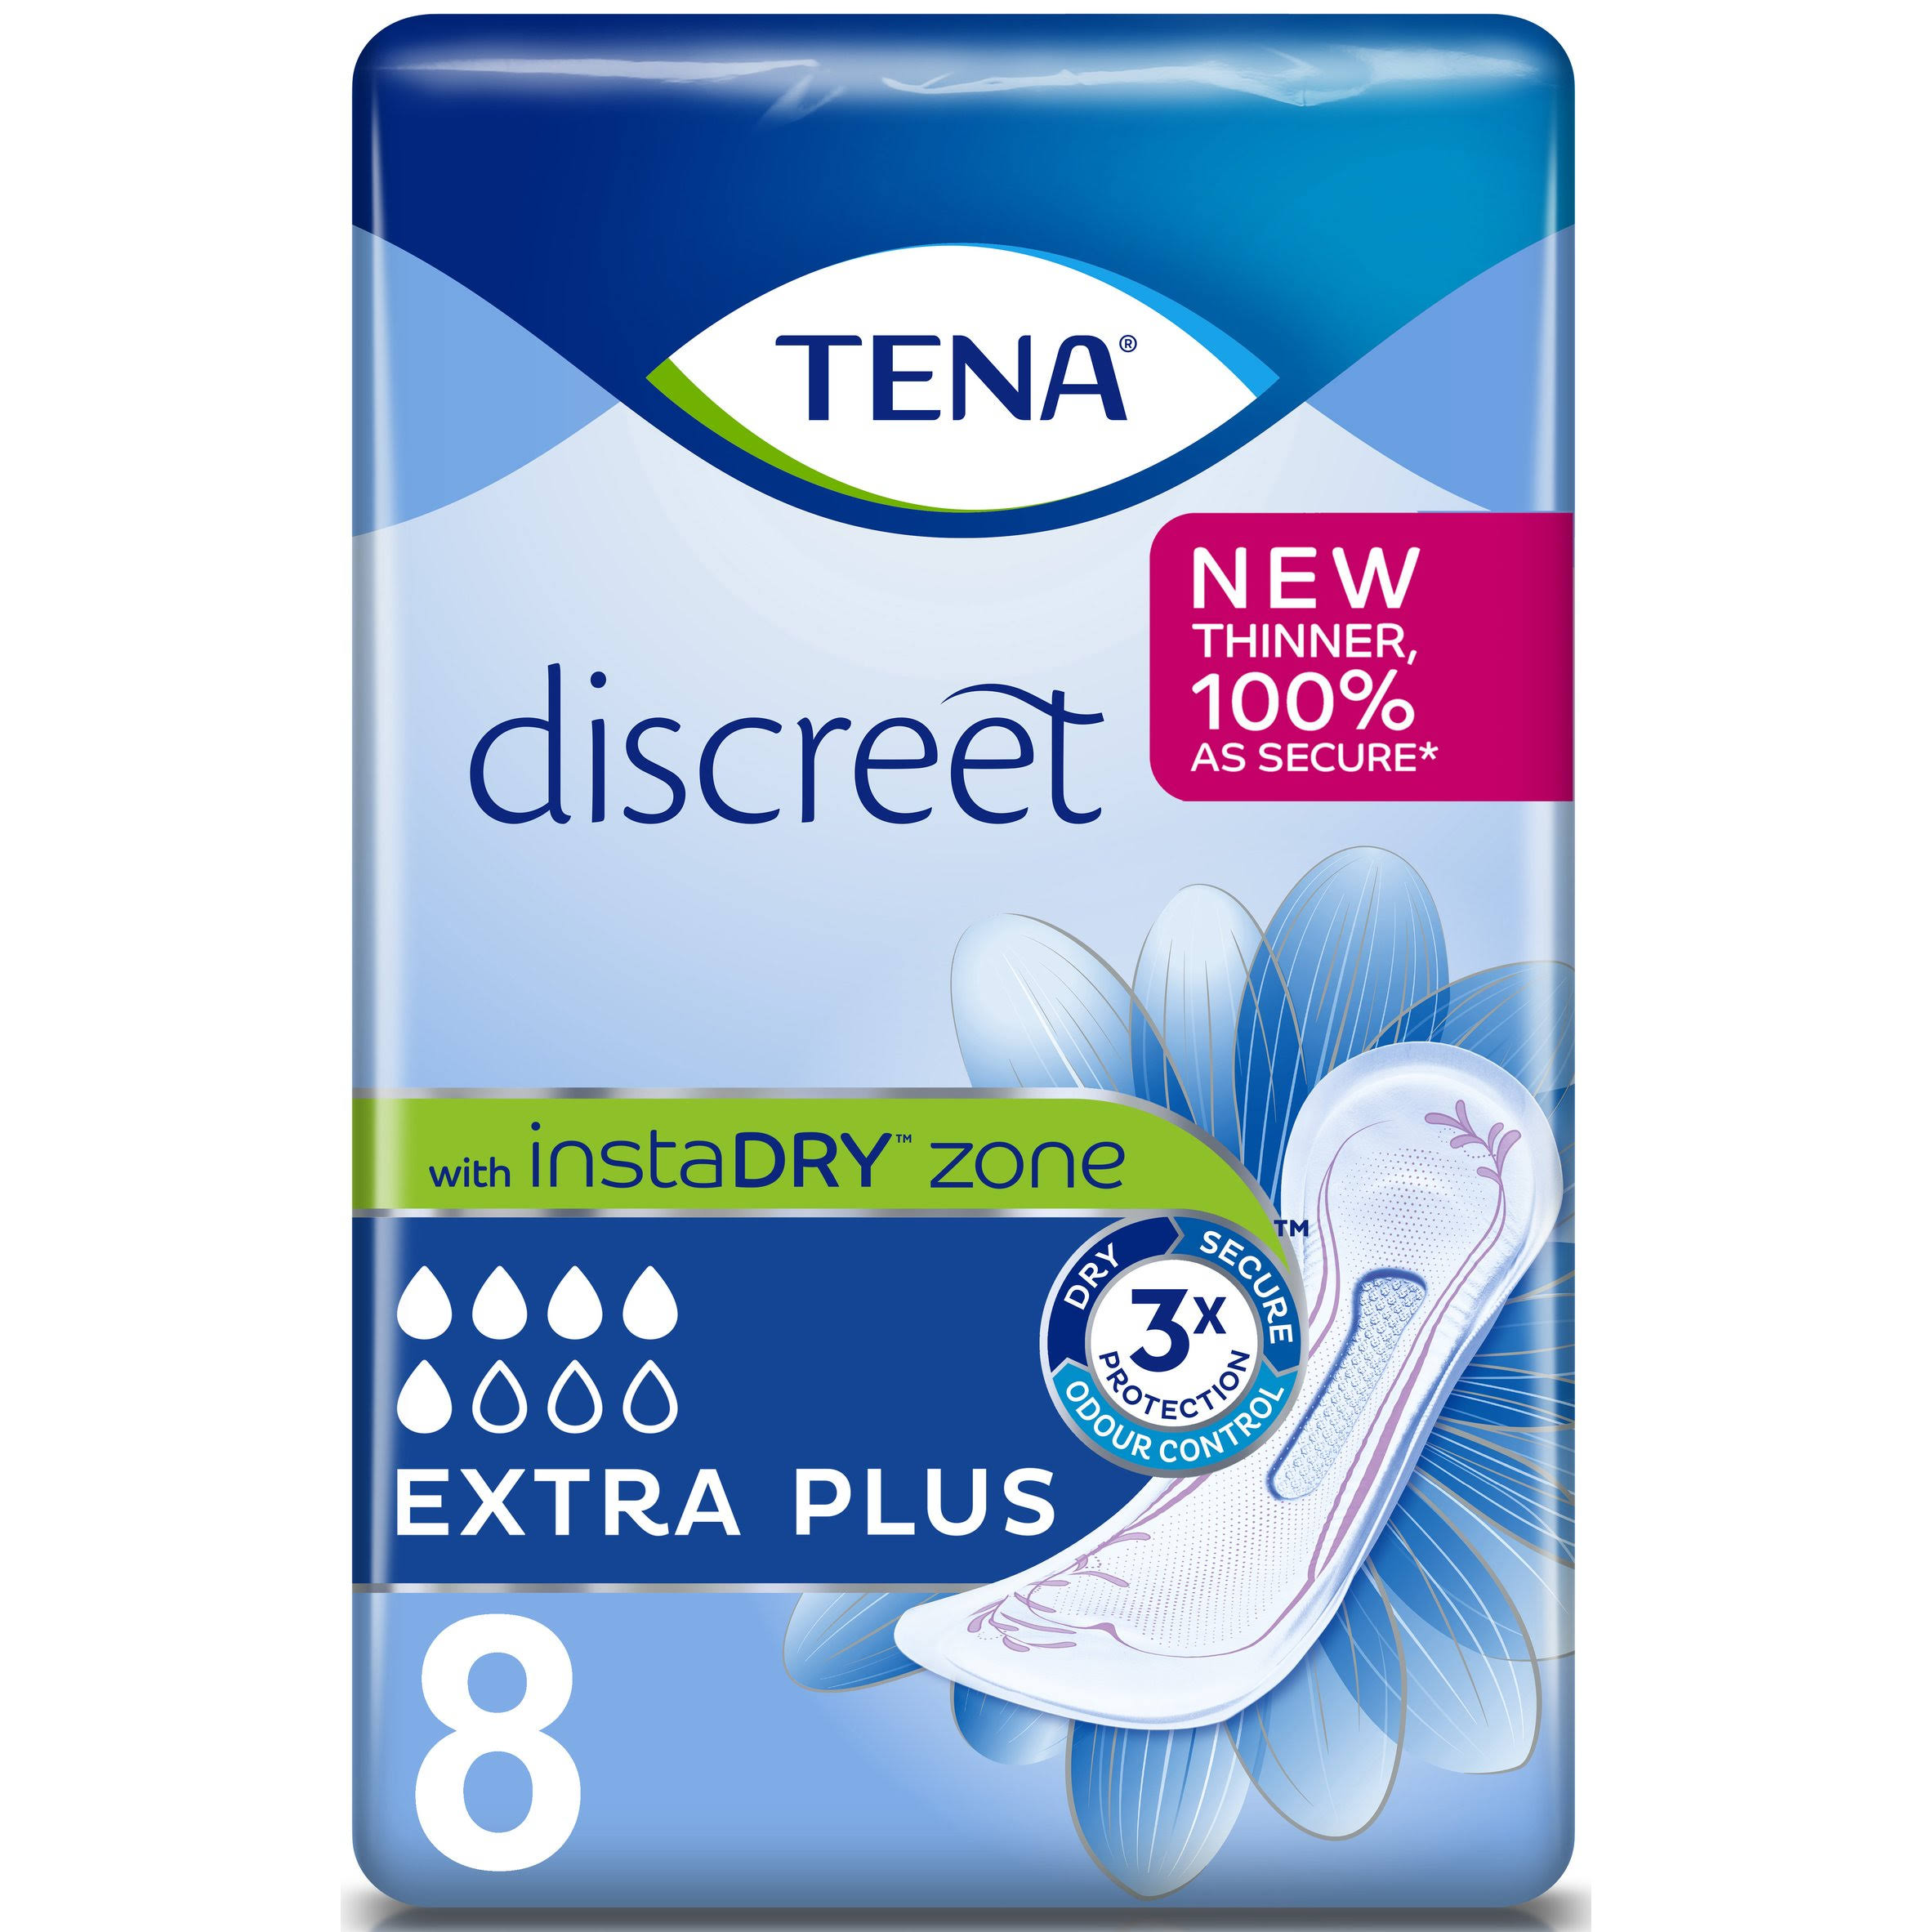 TENA Lady Discreet Extra Plus Incontinence Pads 8 Pack